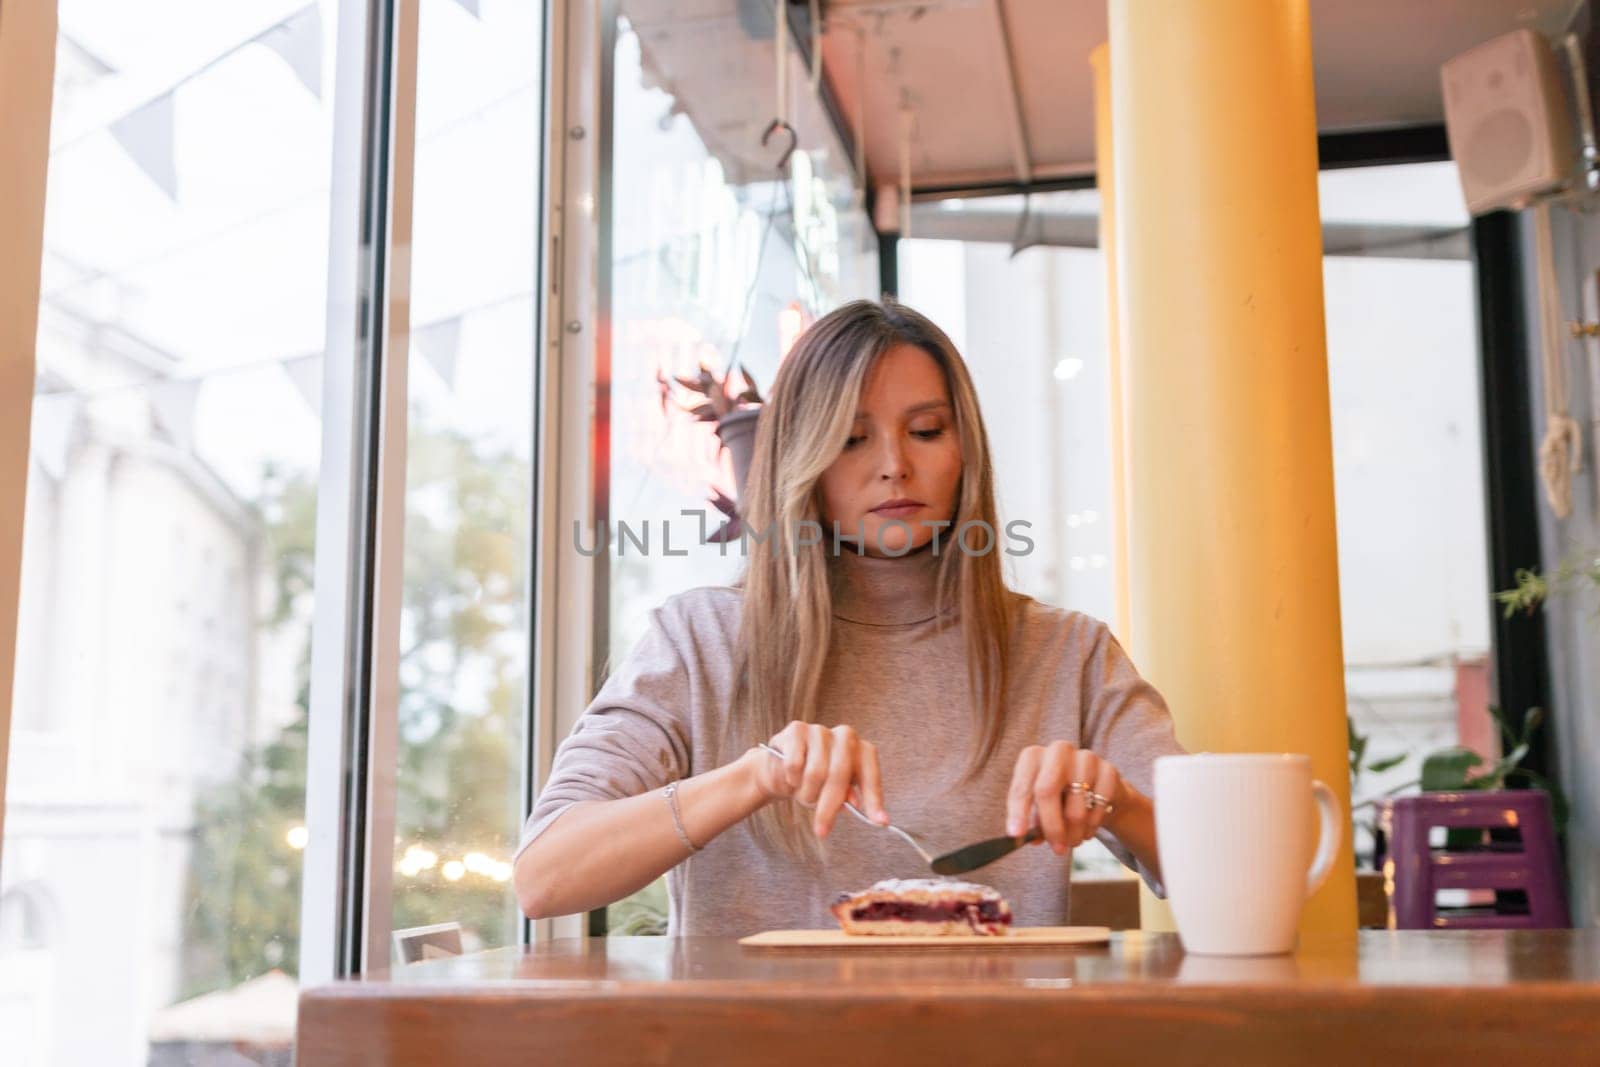 Woman with blonde hair sips cappuccino in a cafe. She is holding the glass up to her face, taking a sip of the drink. by Matiunina